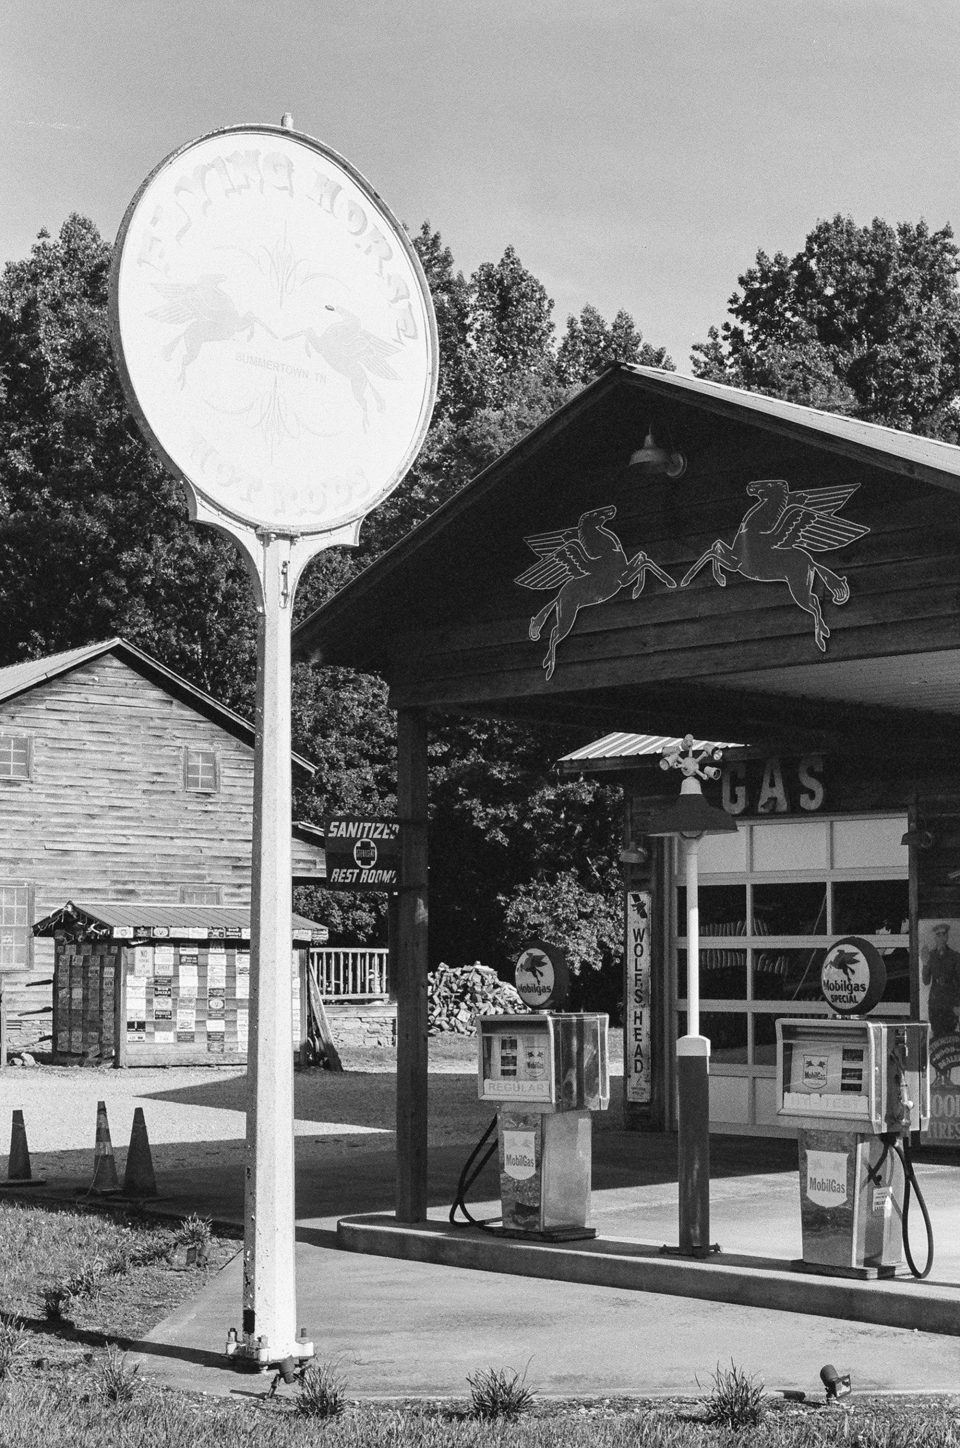 Photograph of a restored old gas station by Keith Dotson. Shot on Kodak Tri-X black and white film using a 40-year-old Pentax K1000 camera and 50mm lens.